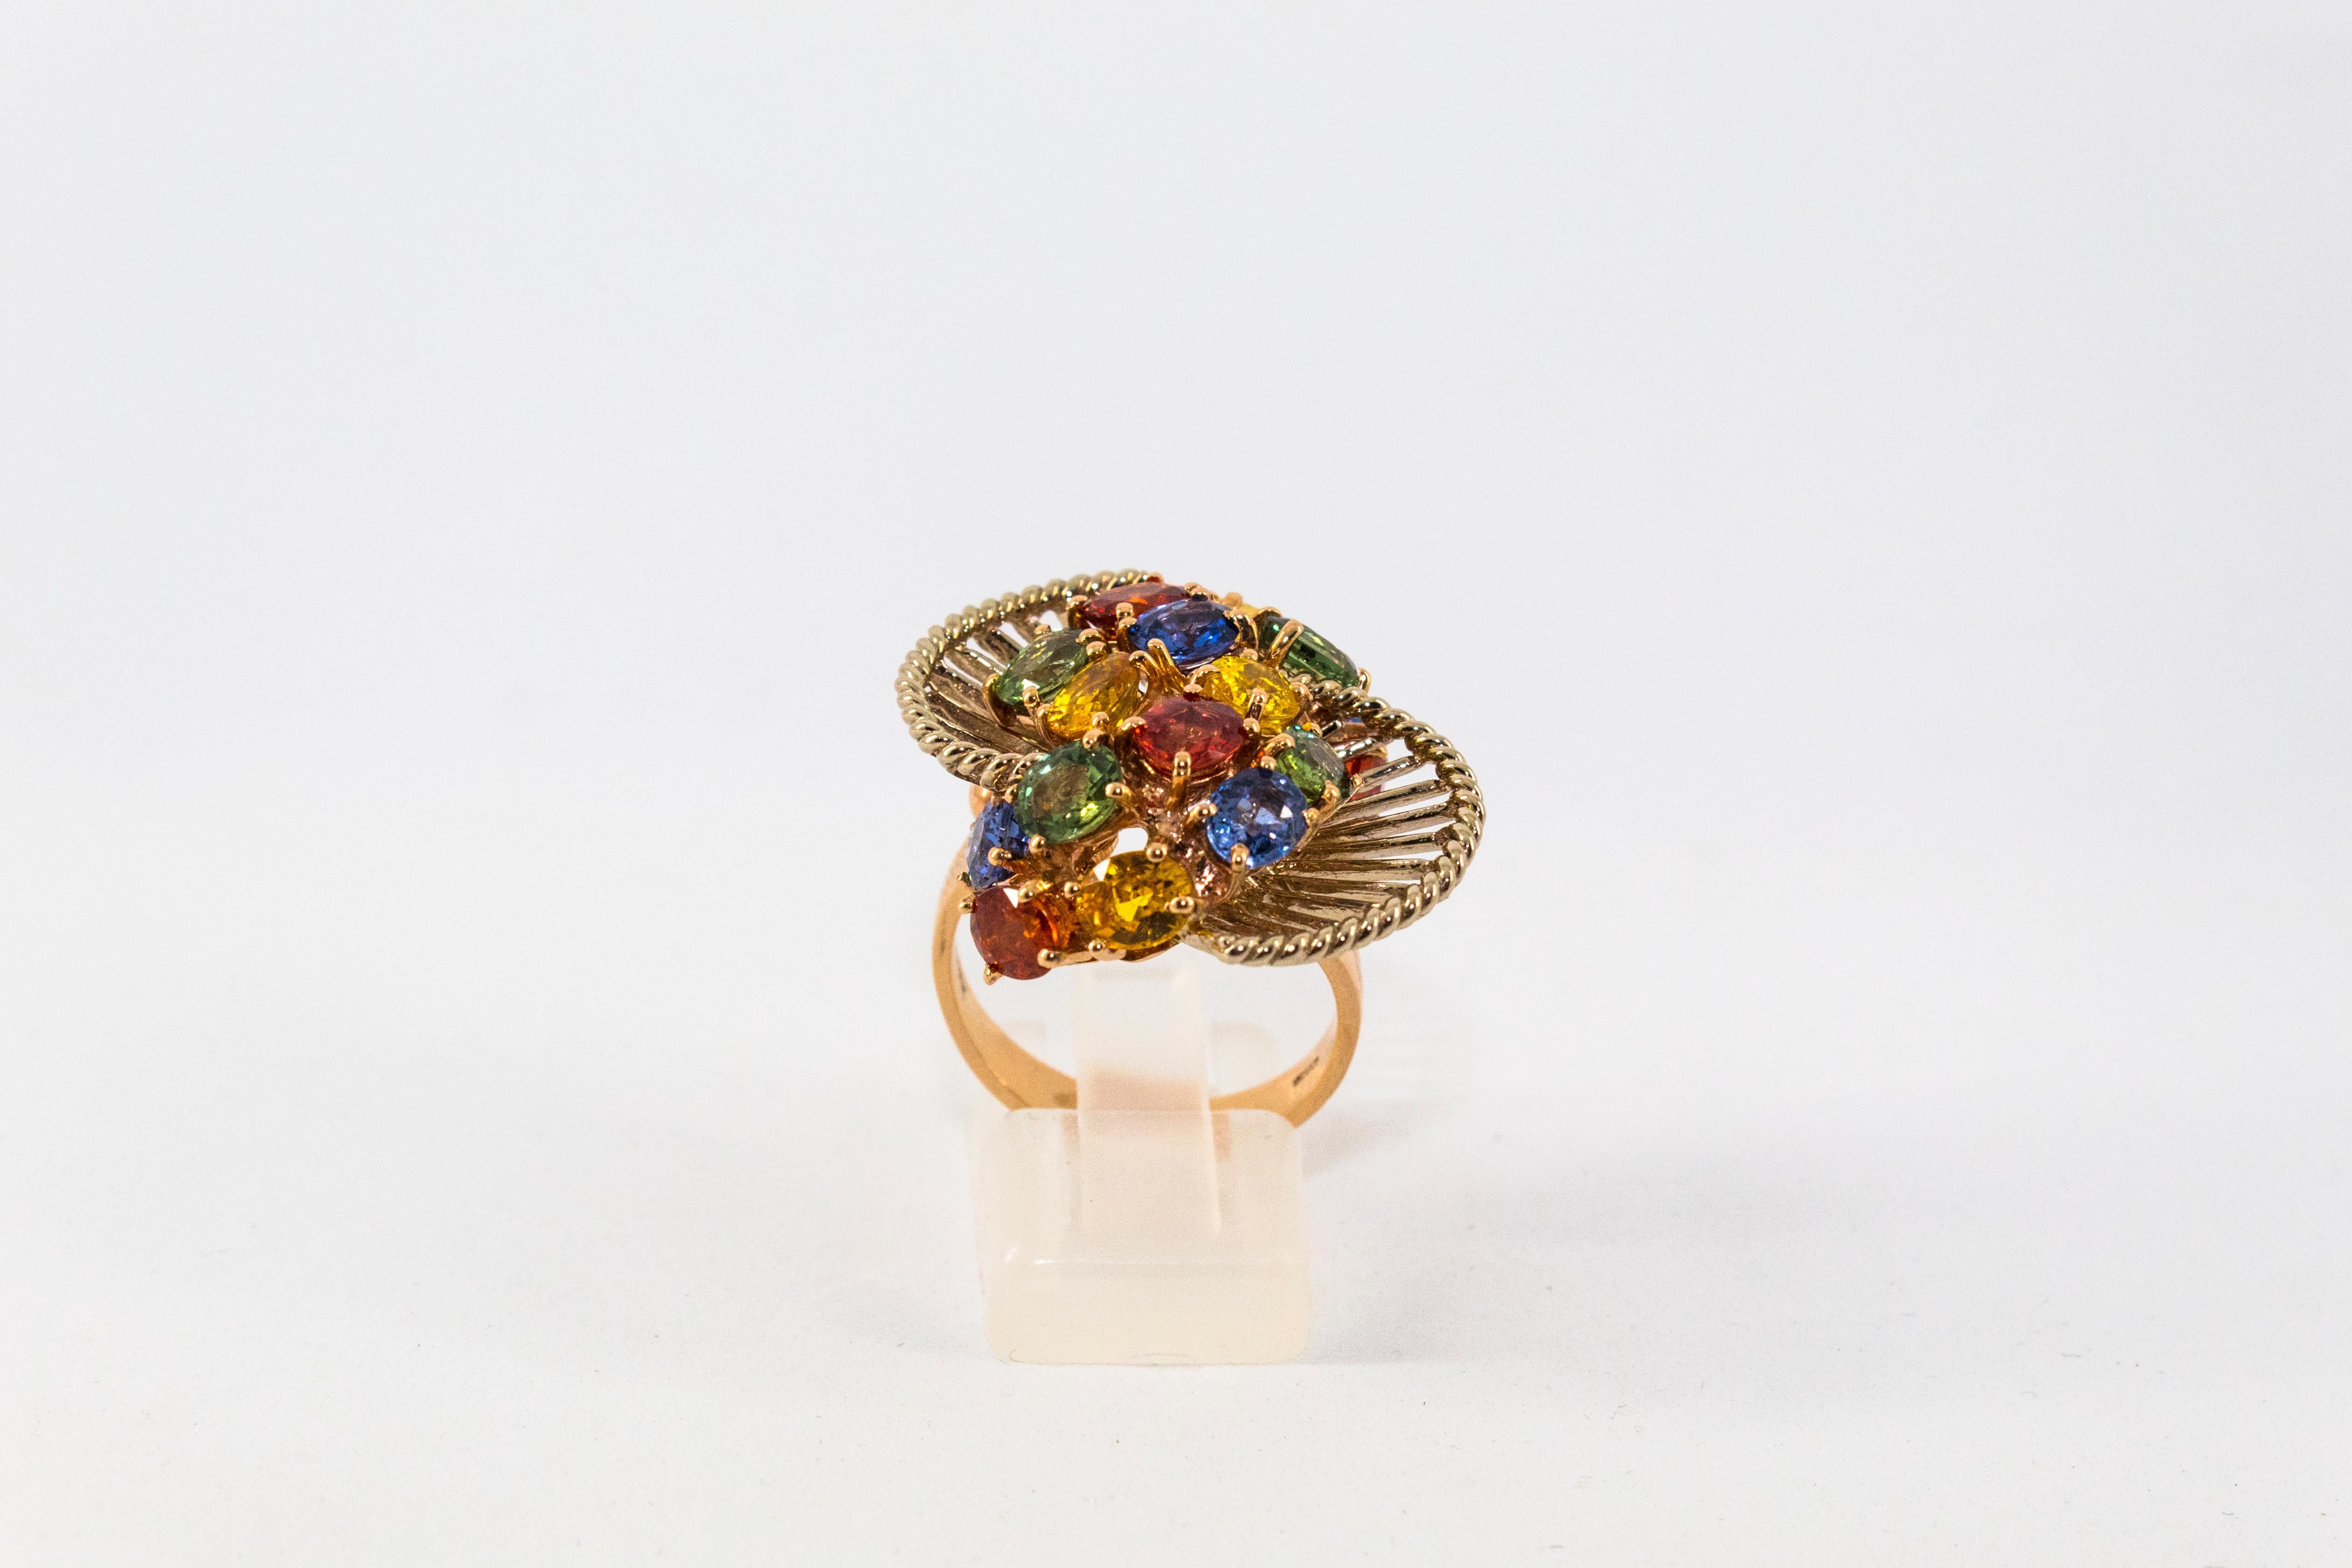 This Ring is made of 14K Yellow Gold.
This Ring has 7.00 Carats of Green, Yellow and Blue Sapphires.

This Ring is inspired by Art Deco.

Size ITA: 16 USA: 7.5

We're a workshop so every piece is handmade, customizable and resizable.